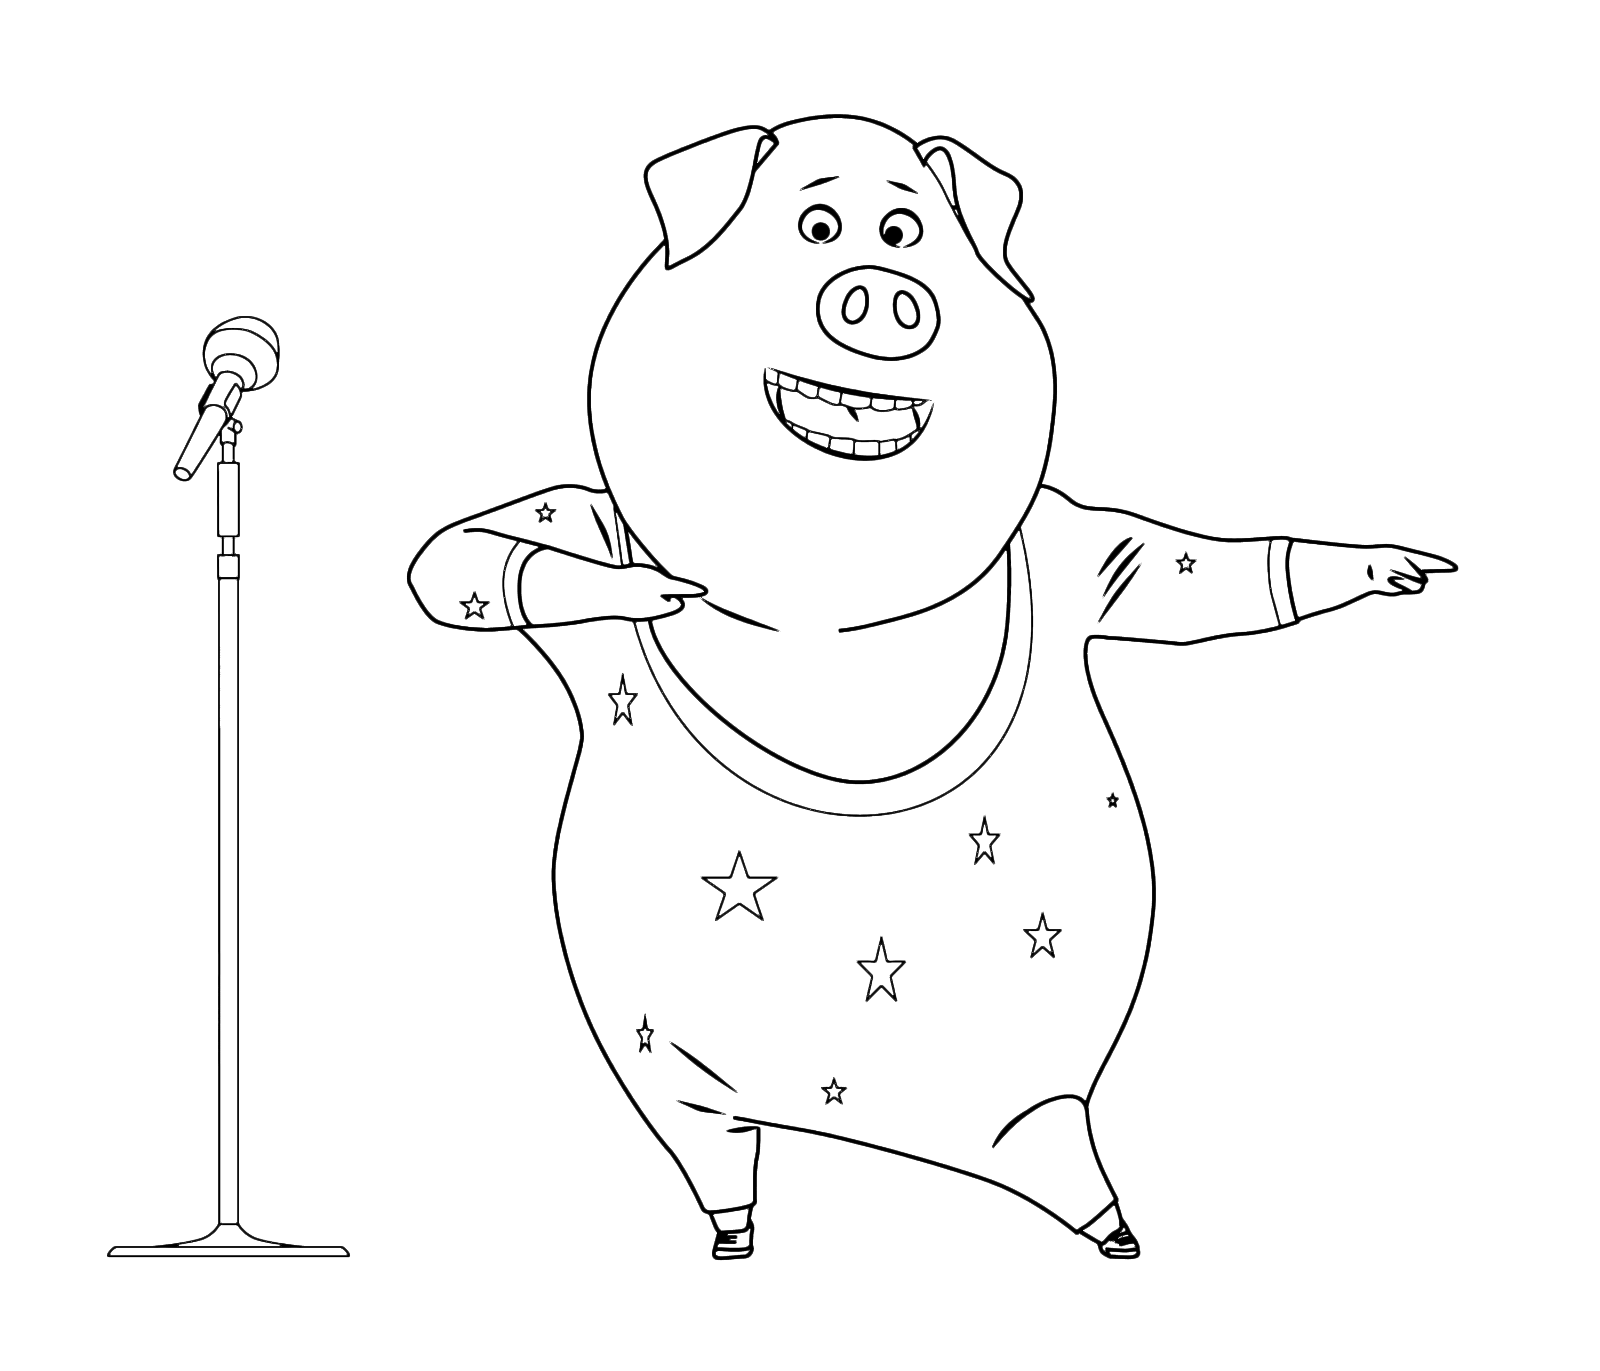 Sing - Rosita the pig performs on stage